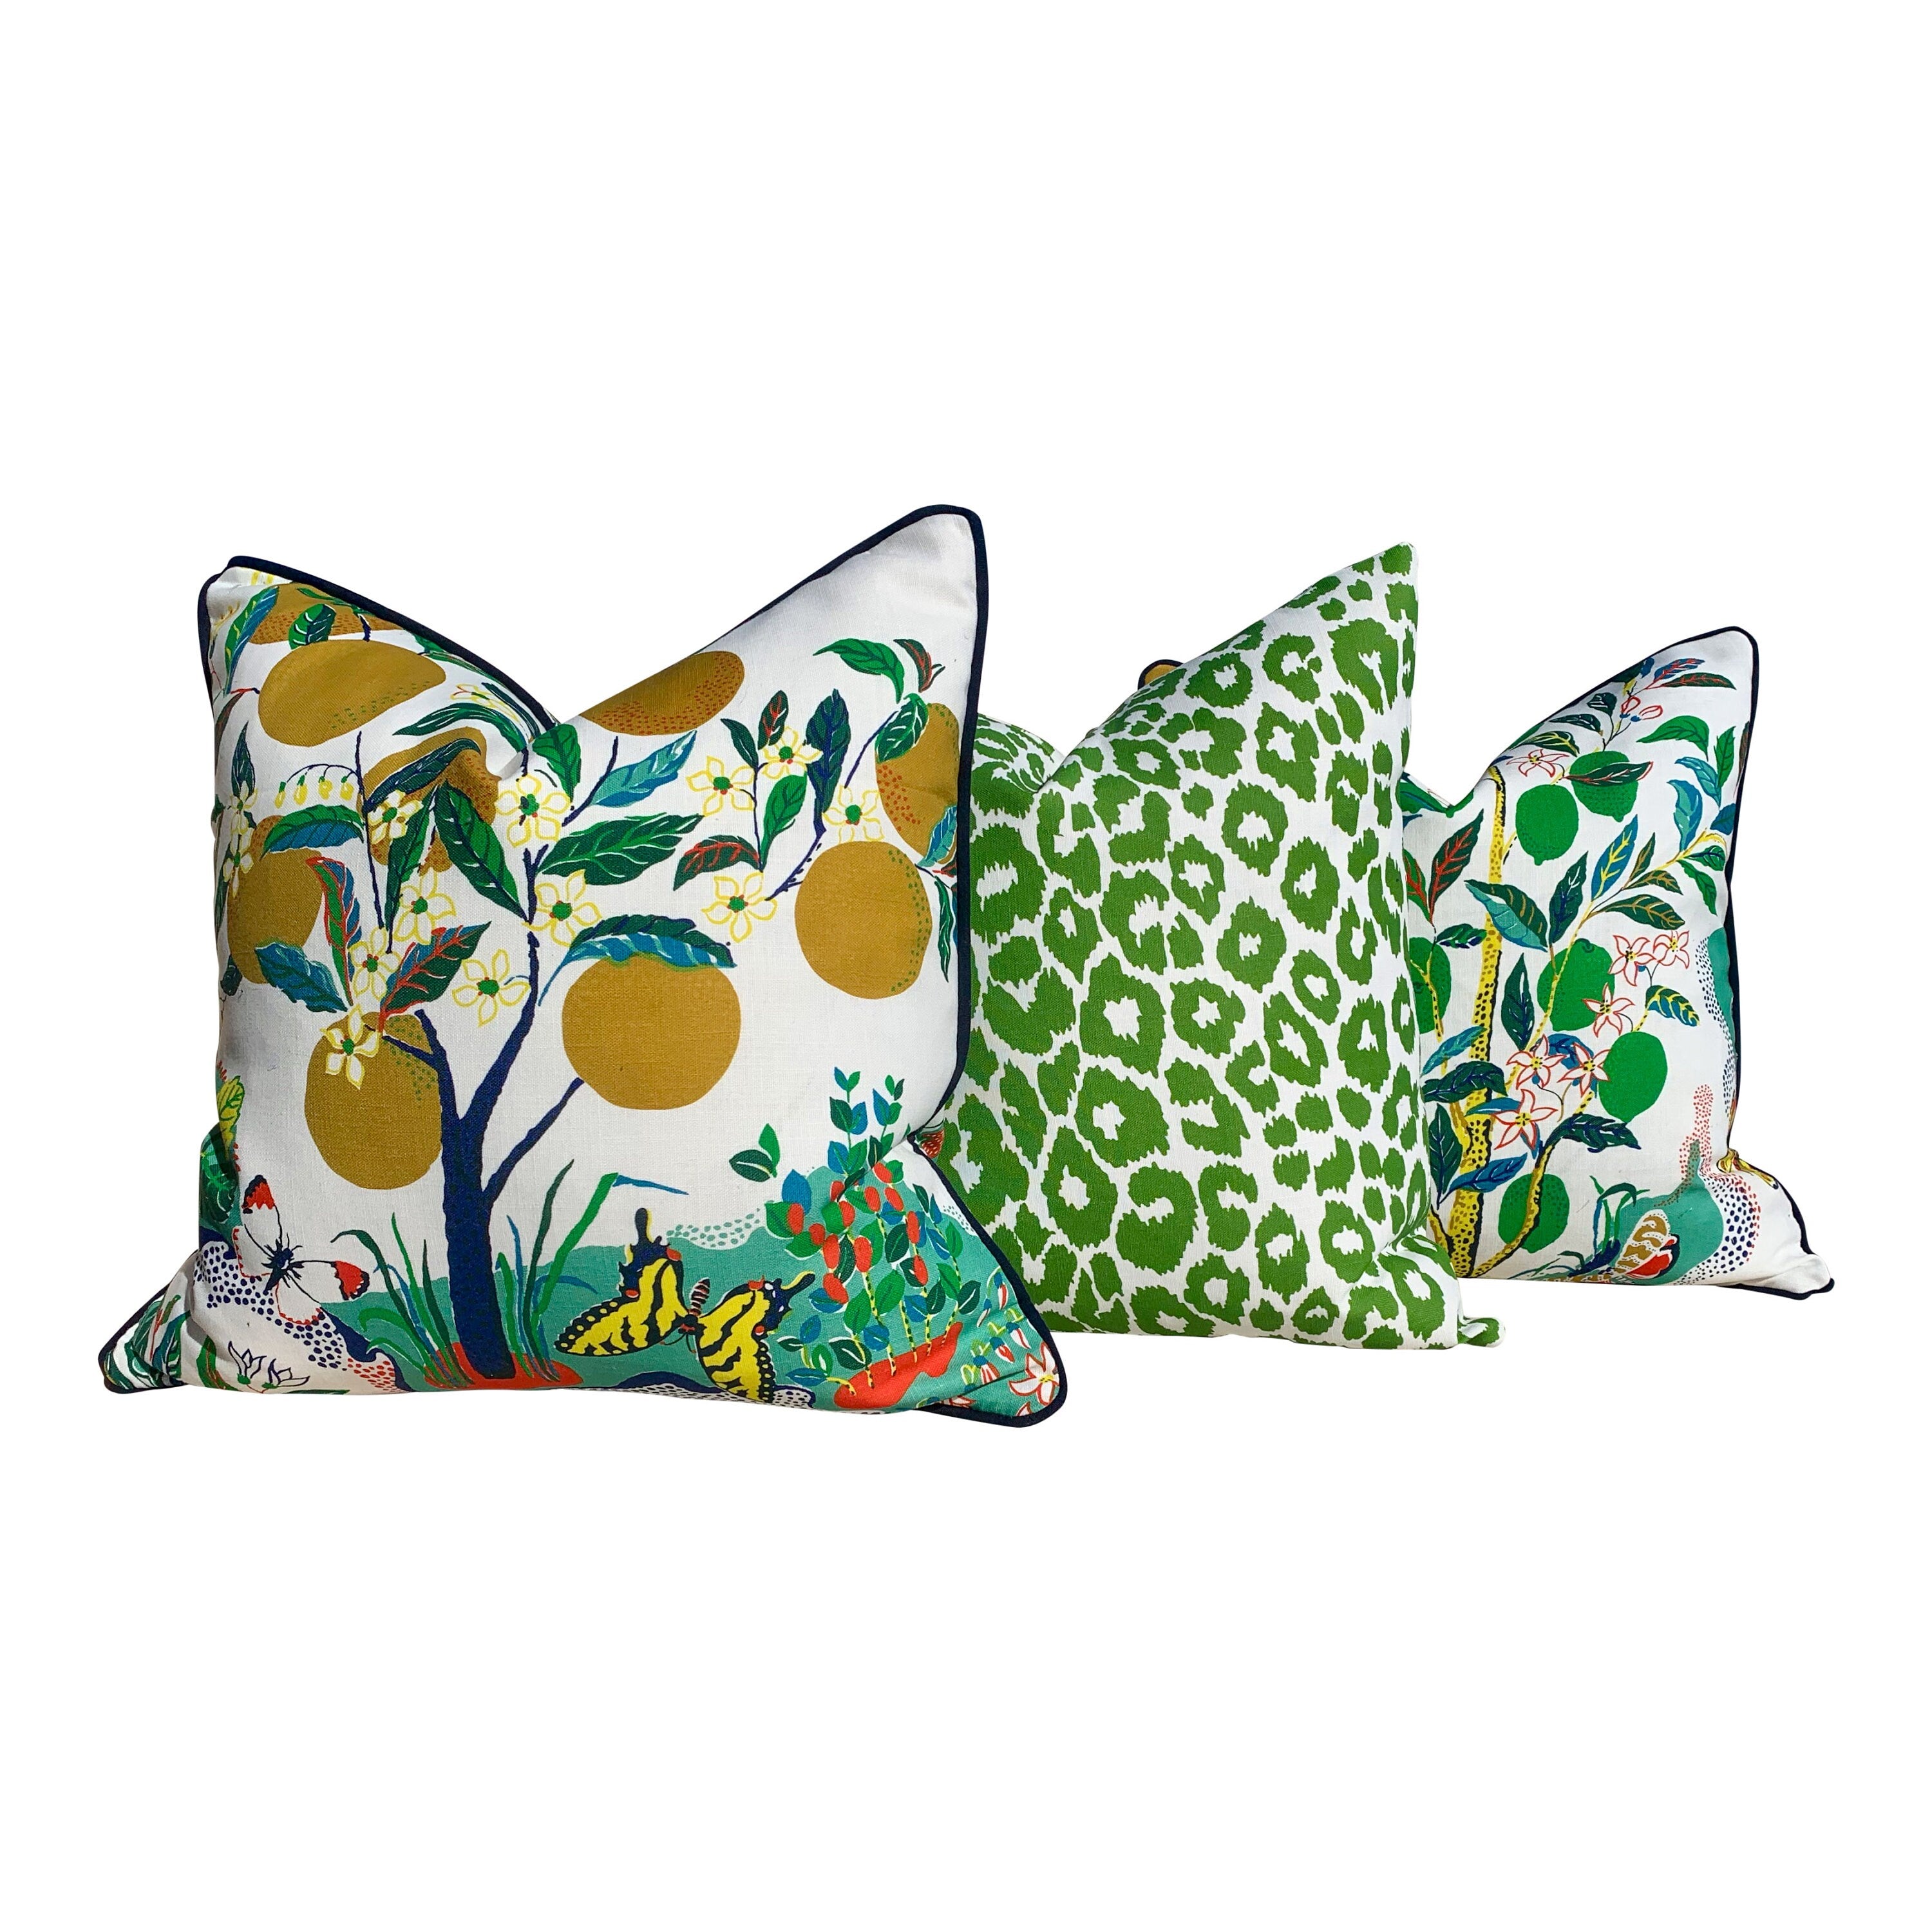 Outdoor Iconic Leopard Pillow in Green. Spotted lumbar Pillow Schumacher Accent Pillow Cover Square Toss Pillow, Accent Pillow